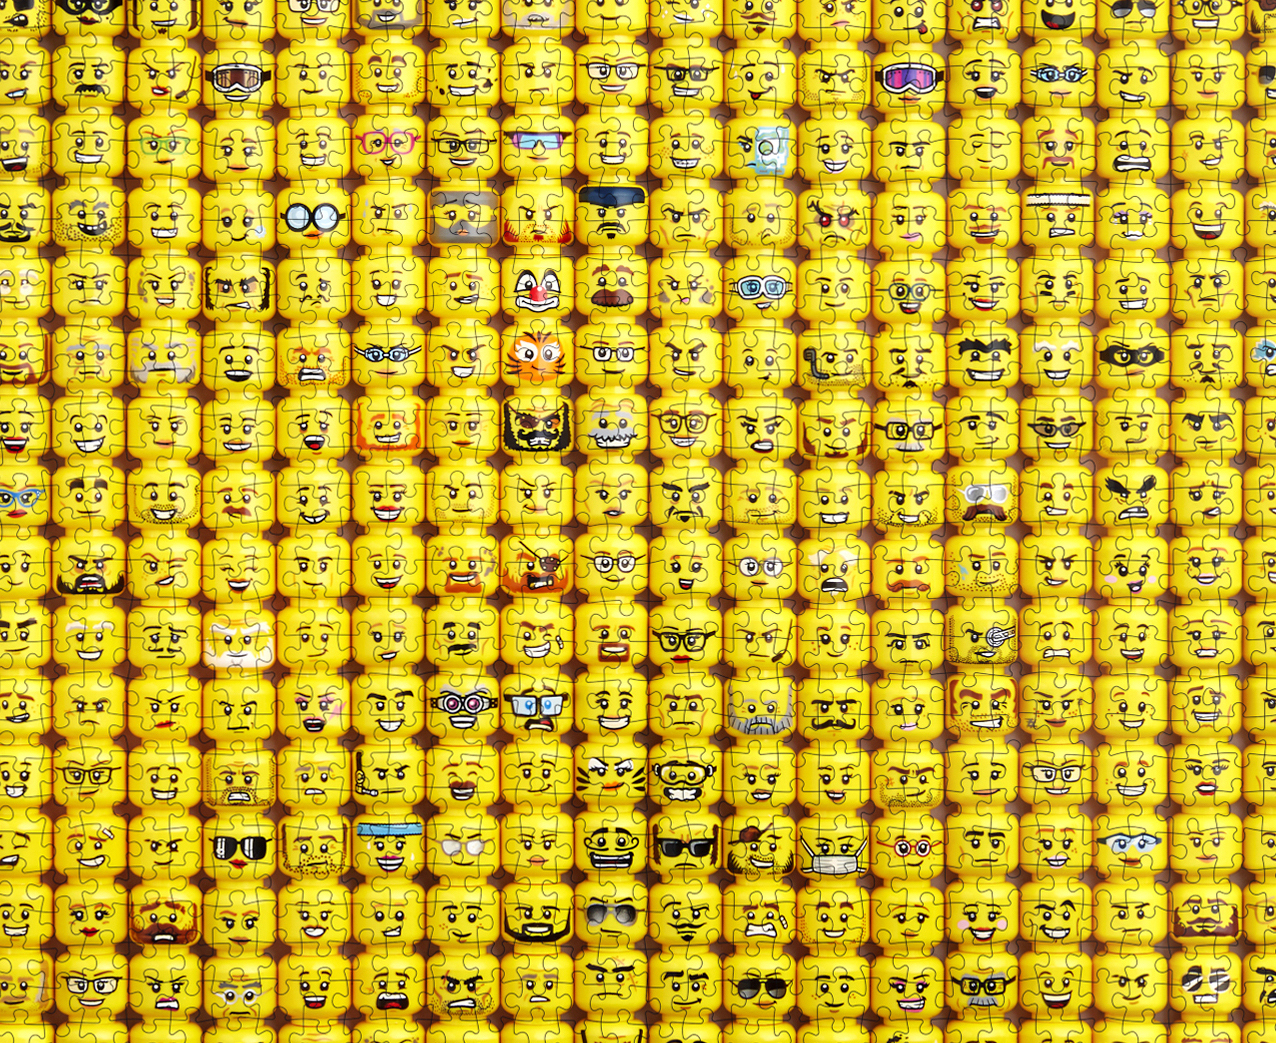 LEGO MINIFIGURE FACES PUZZLE 1000 PC - THE TOY STORE